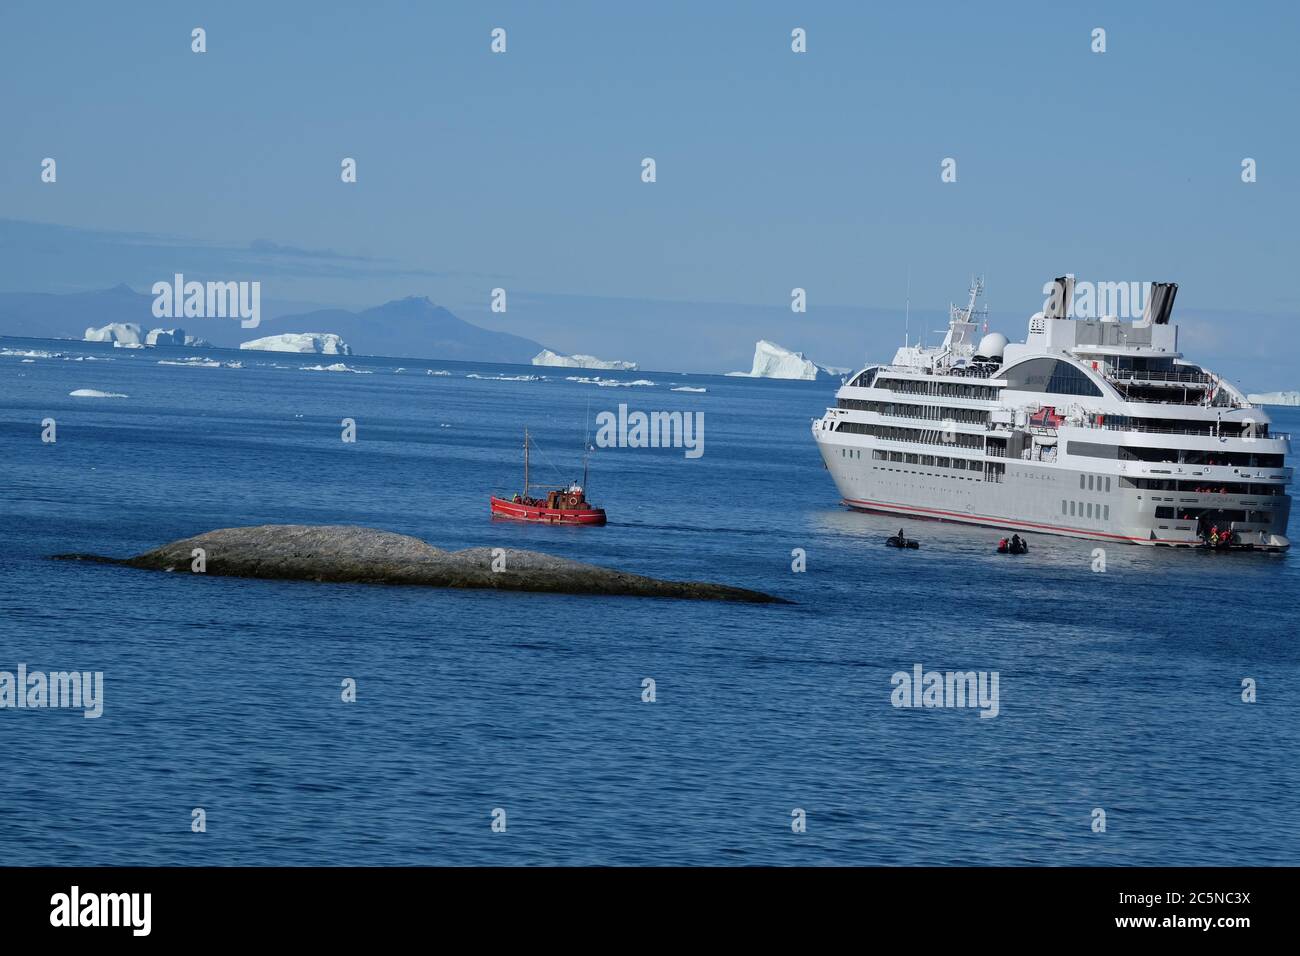 Little red fishing trawler stands by to board passengers from cruise liner for their memorable sail around giant icebergs. Stock Photo